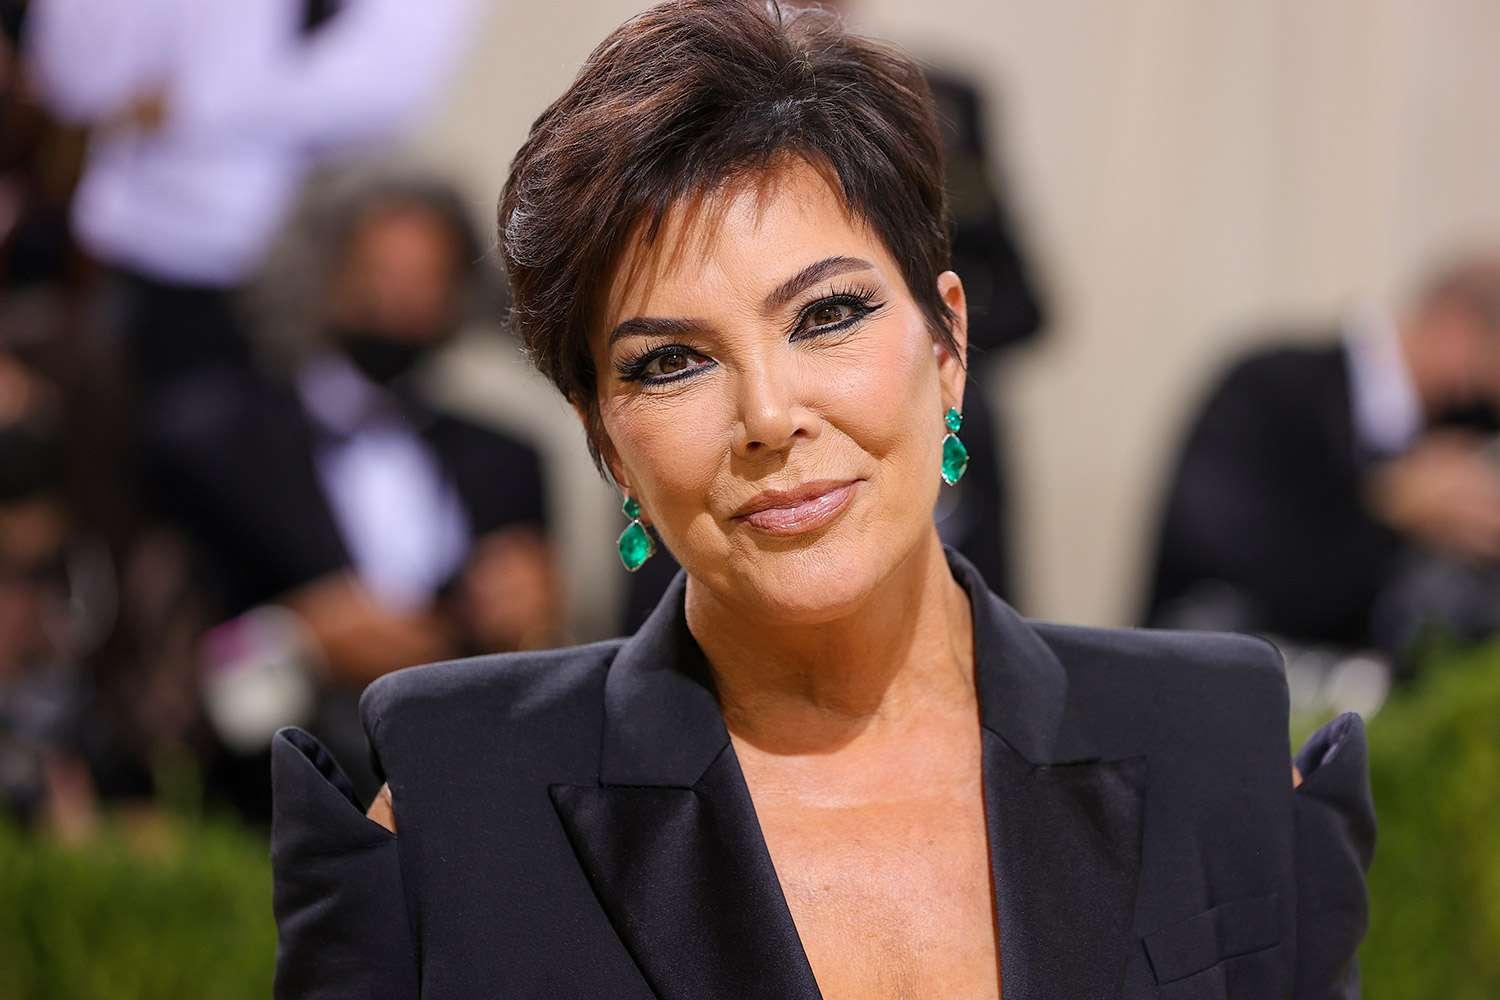 What Businesses Does Kris Jenner Own What Is Her Net Worth